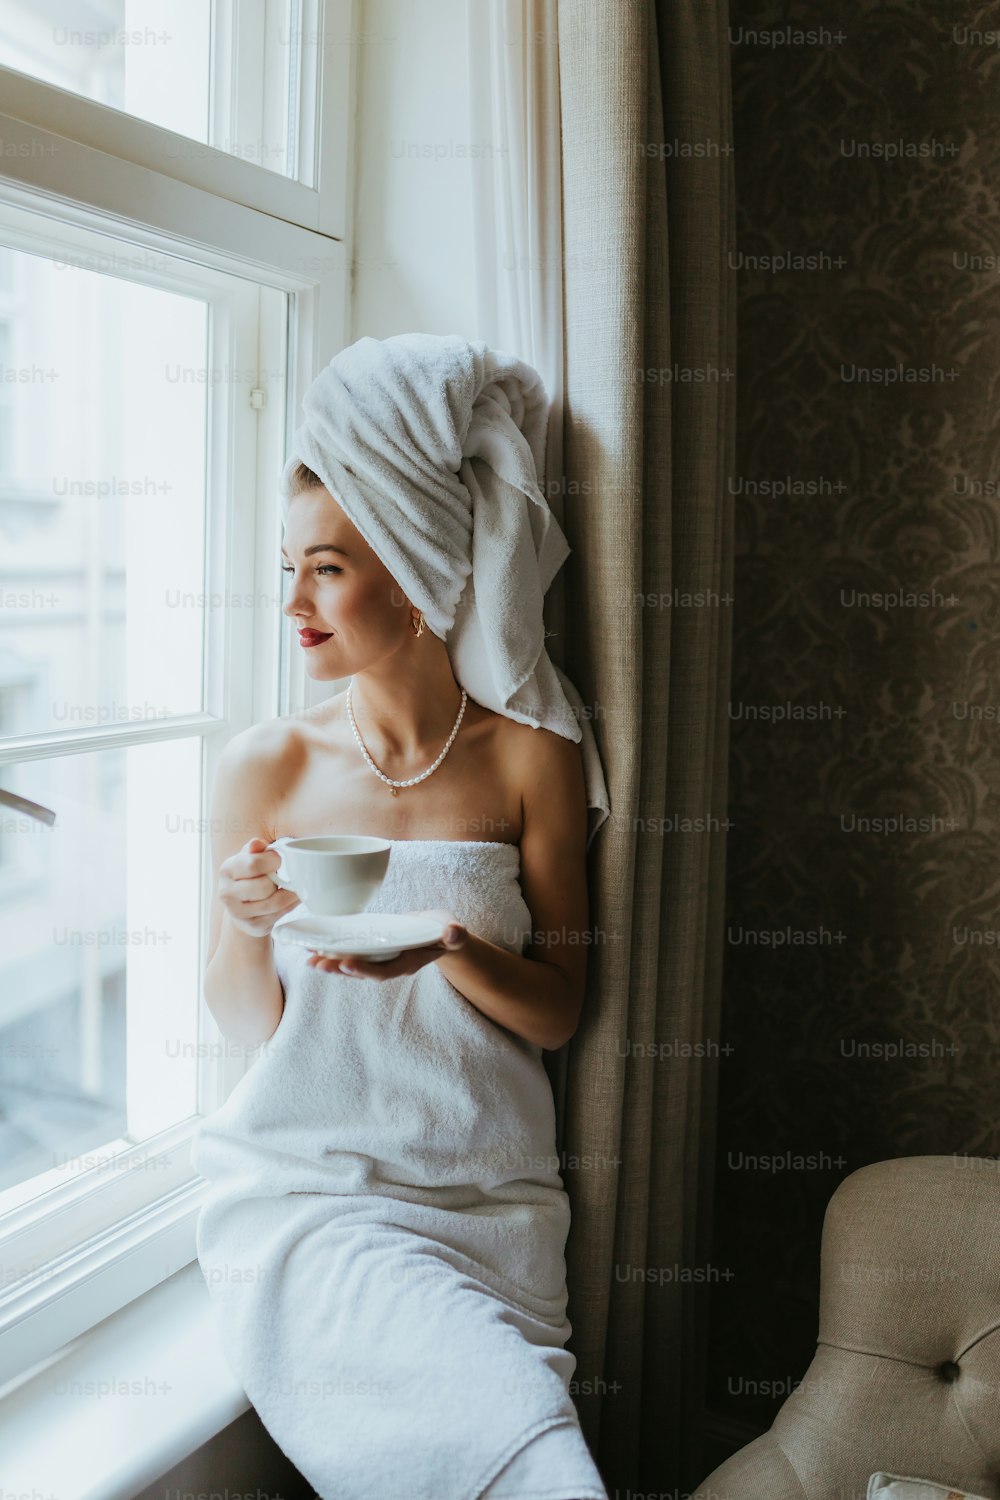 a woman in a towel holding a cup and looking out a window